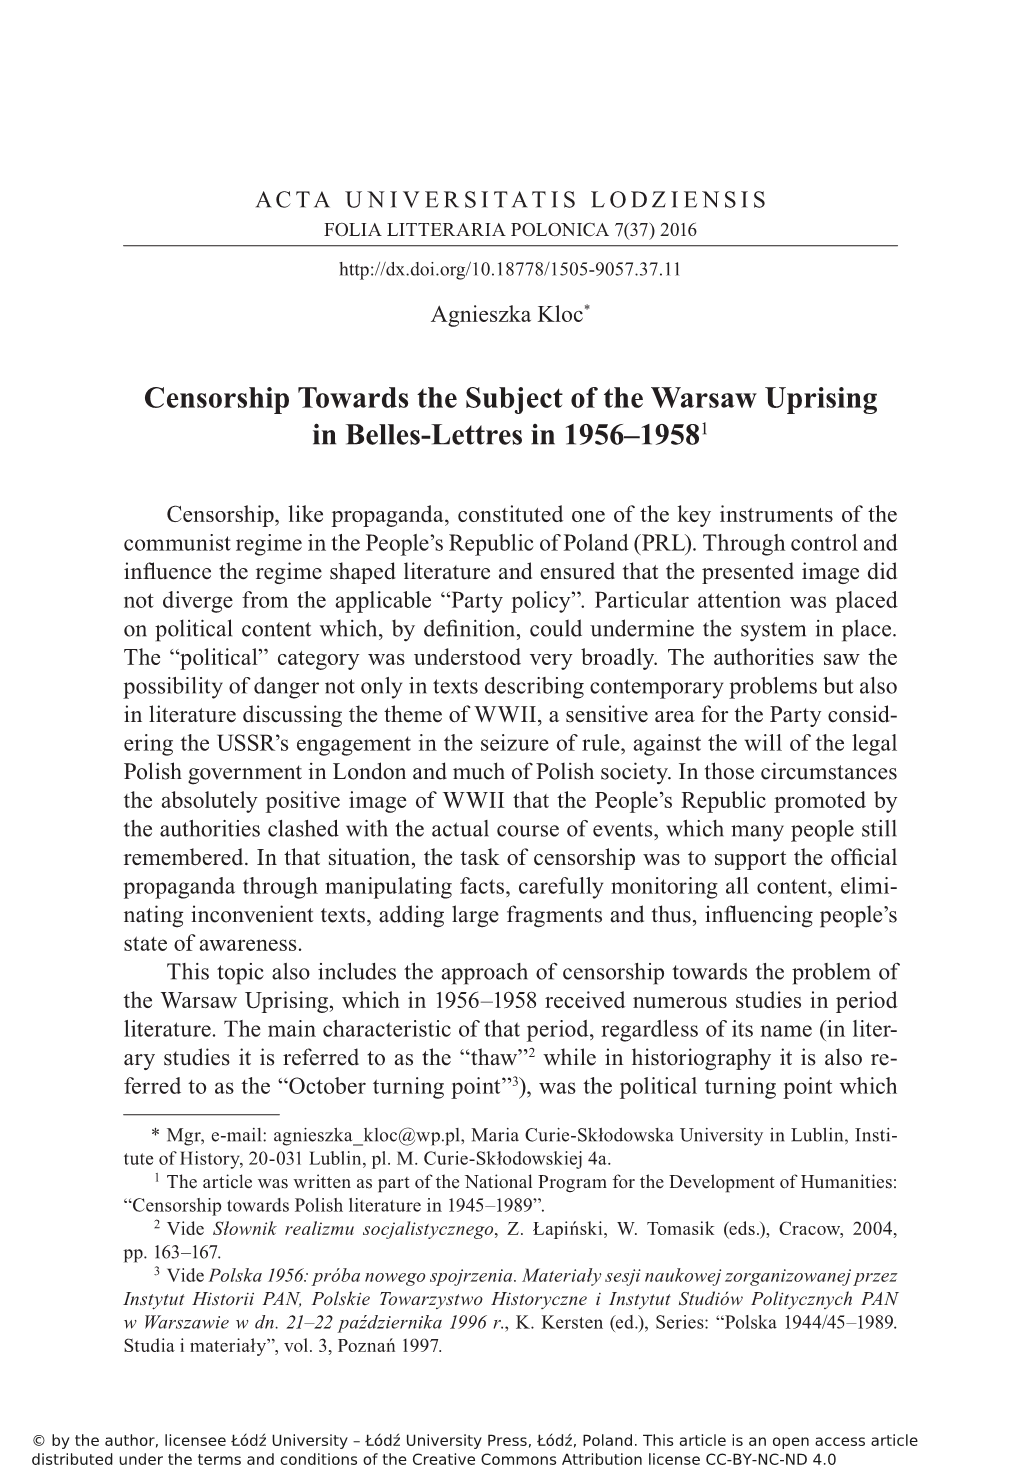 Censorship Towards the Subject of the Warsaw Uprising in Belles-Lettres in 1956–19581